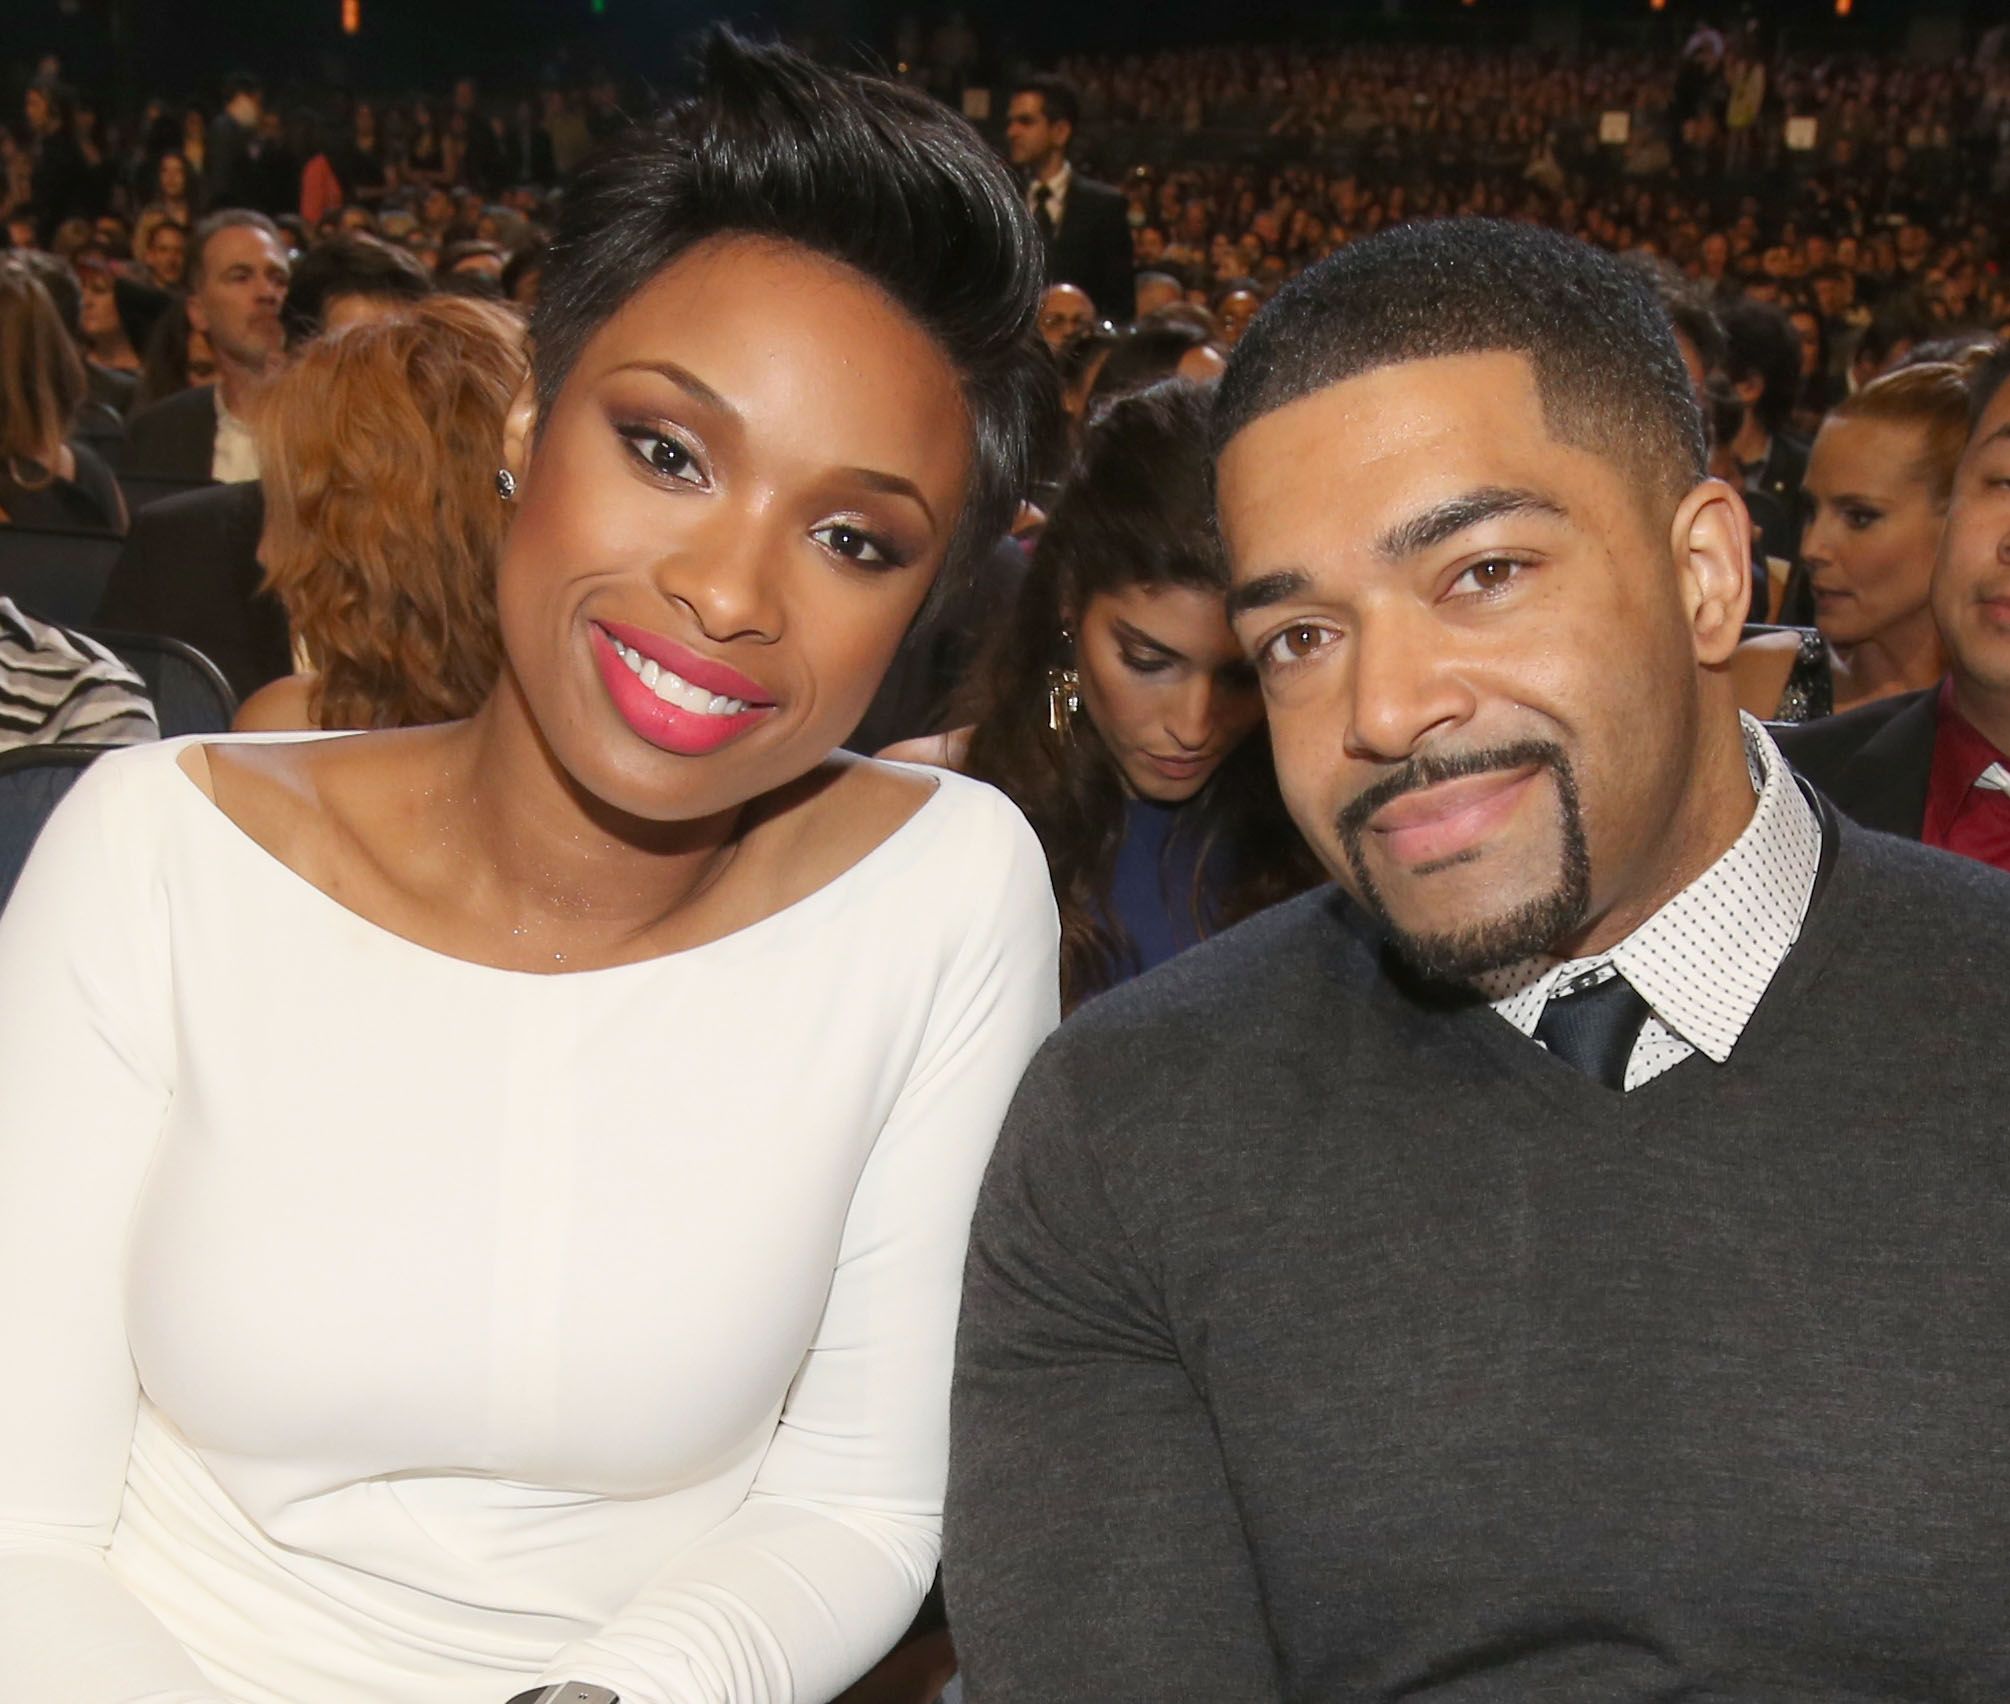 Jennifer Hudson and David Otunga attend the 40th Annual People's Choice Awards on January 8, 2014. | Photo: Getty Images